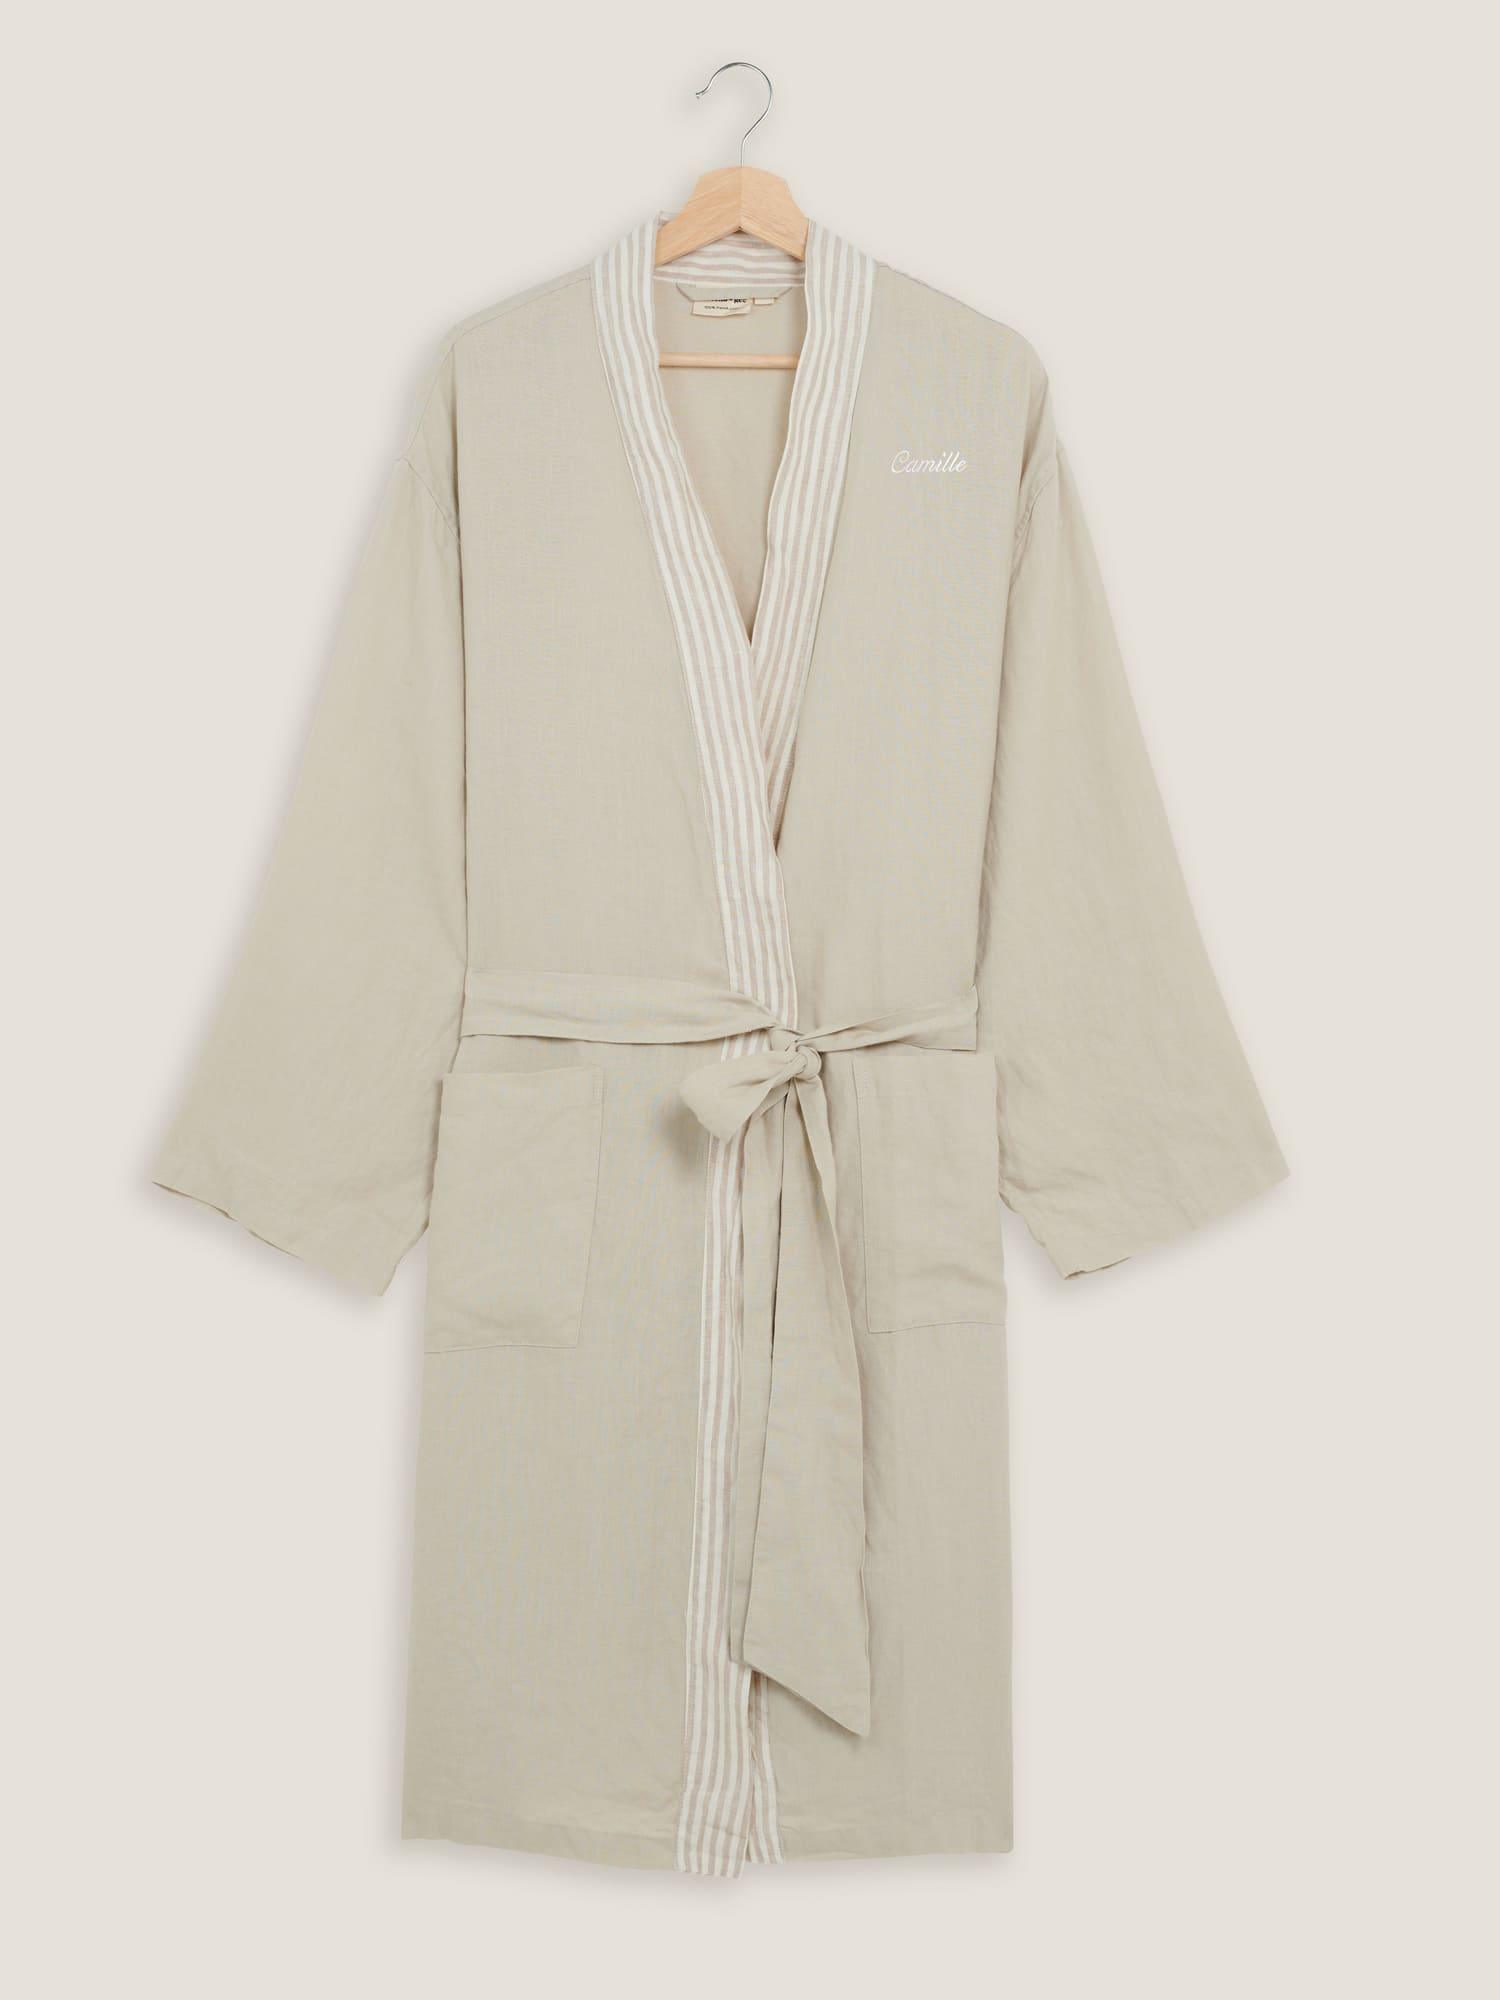 Embroidered Robe in Sand